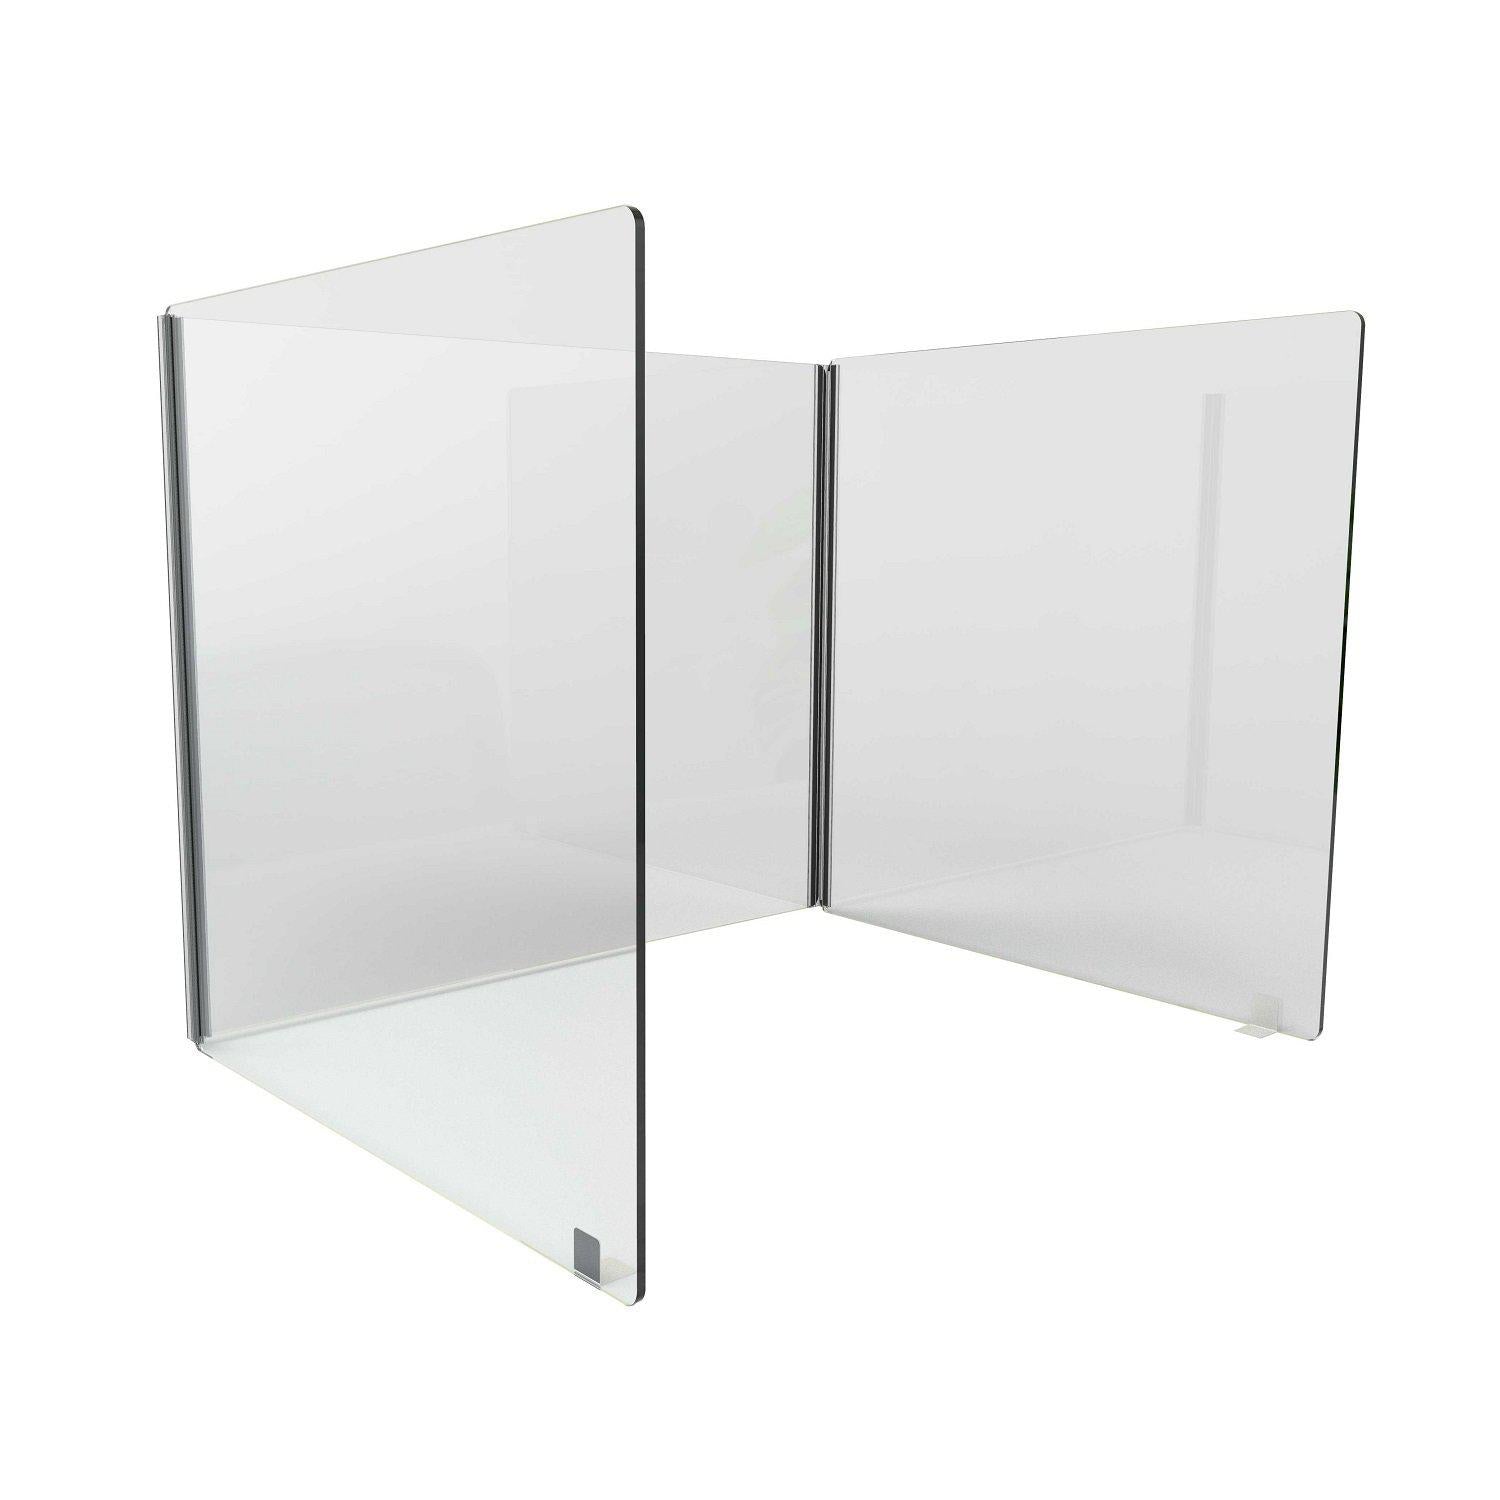 3-Sided Clear Thermoplastic Desktop Protection Screen/Sneeze Guard, 24”H x 60”W x 24”D